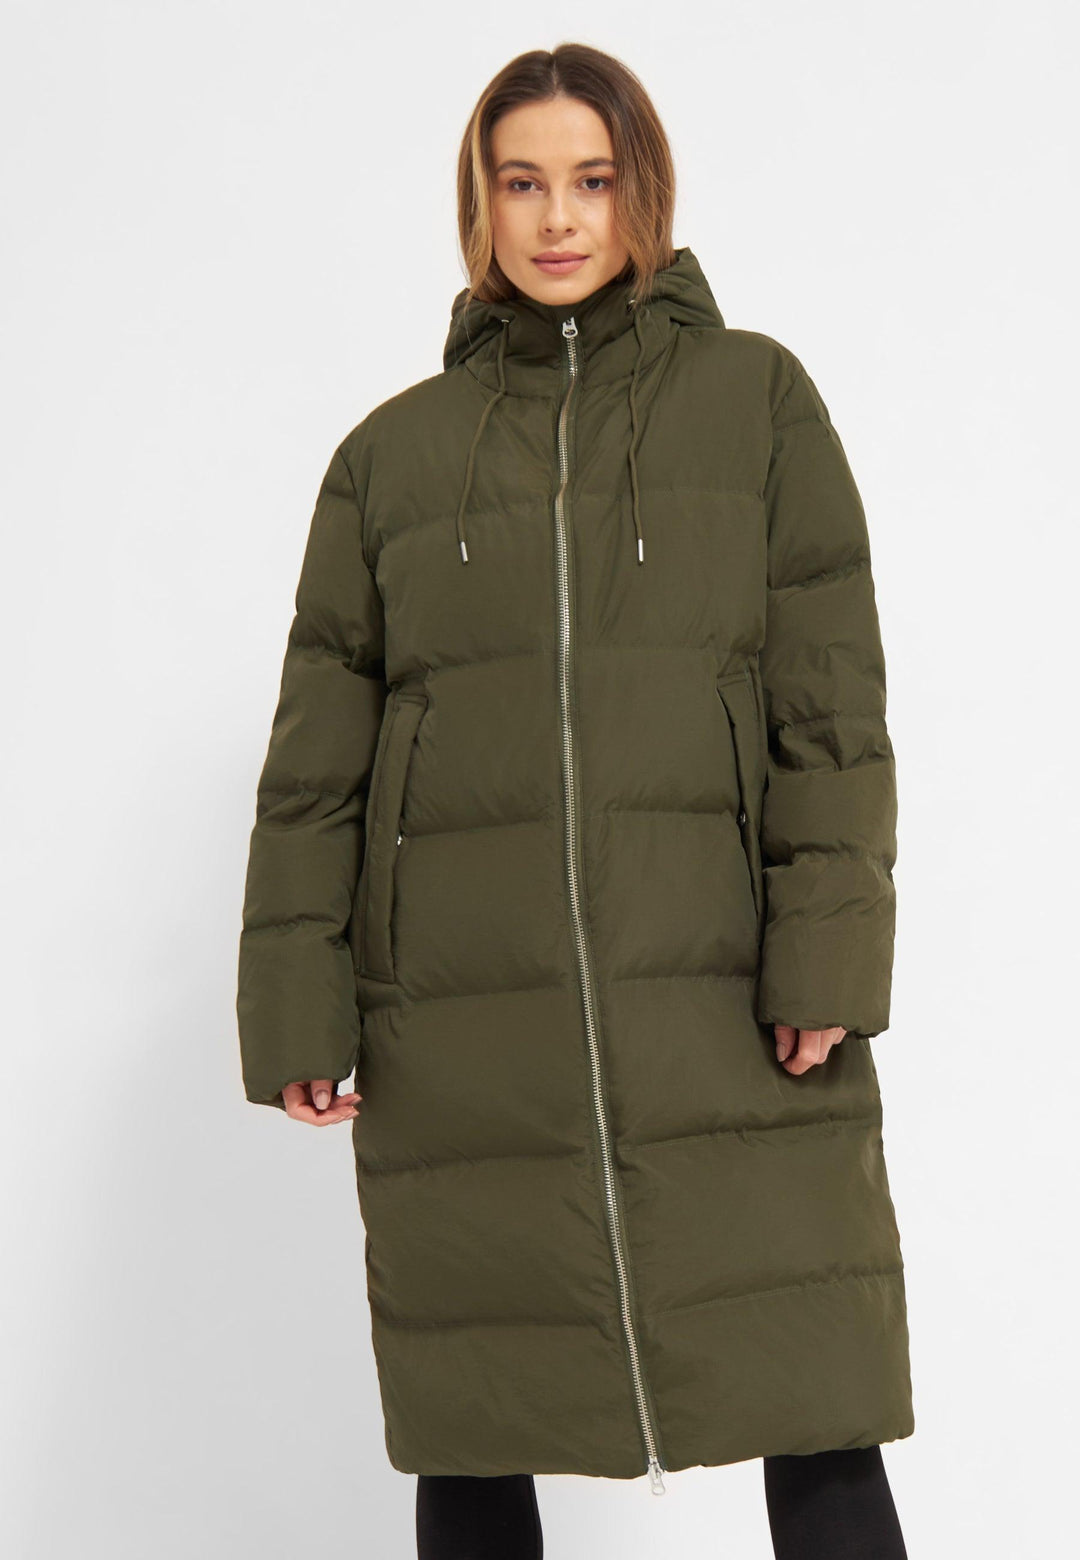 Pieces longline padded coat with hood in olive green